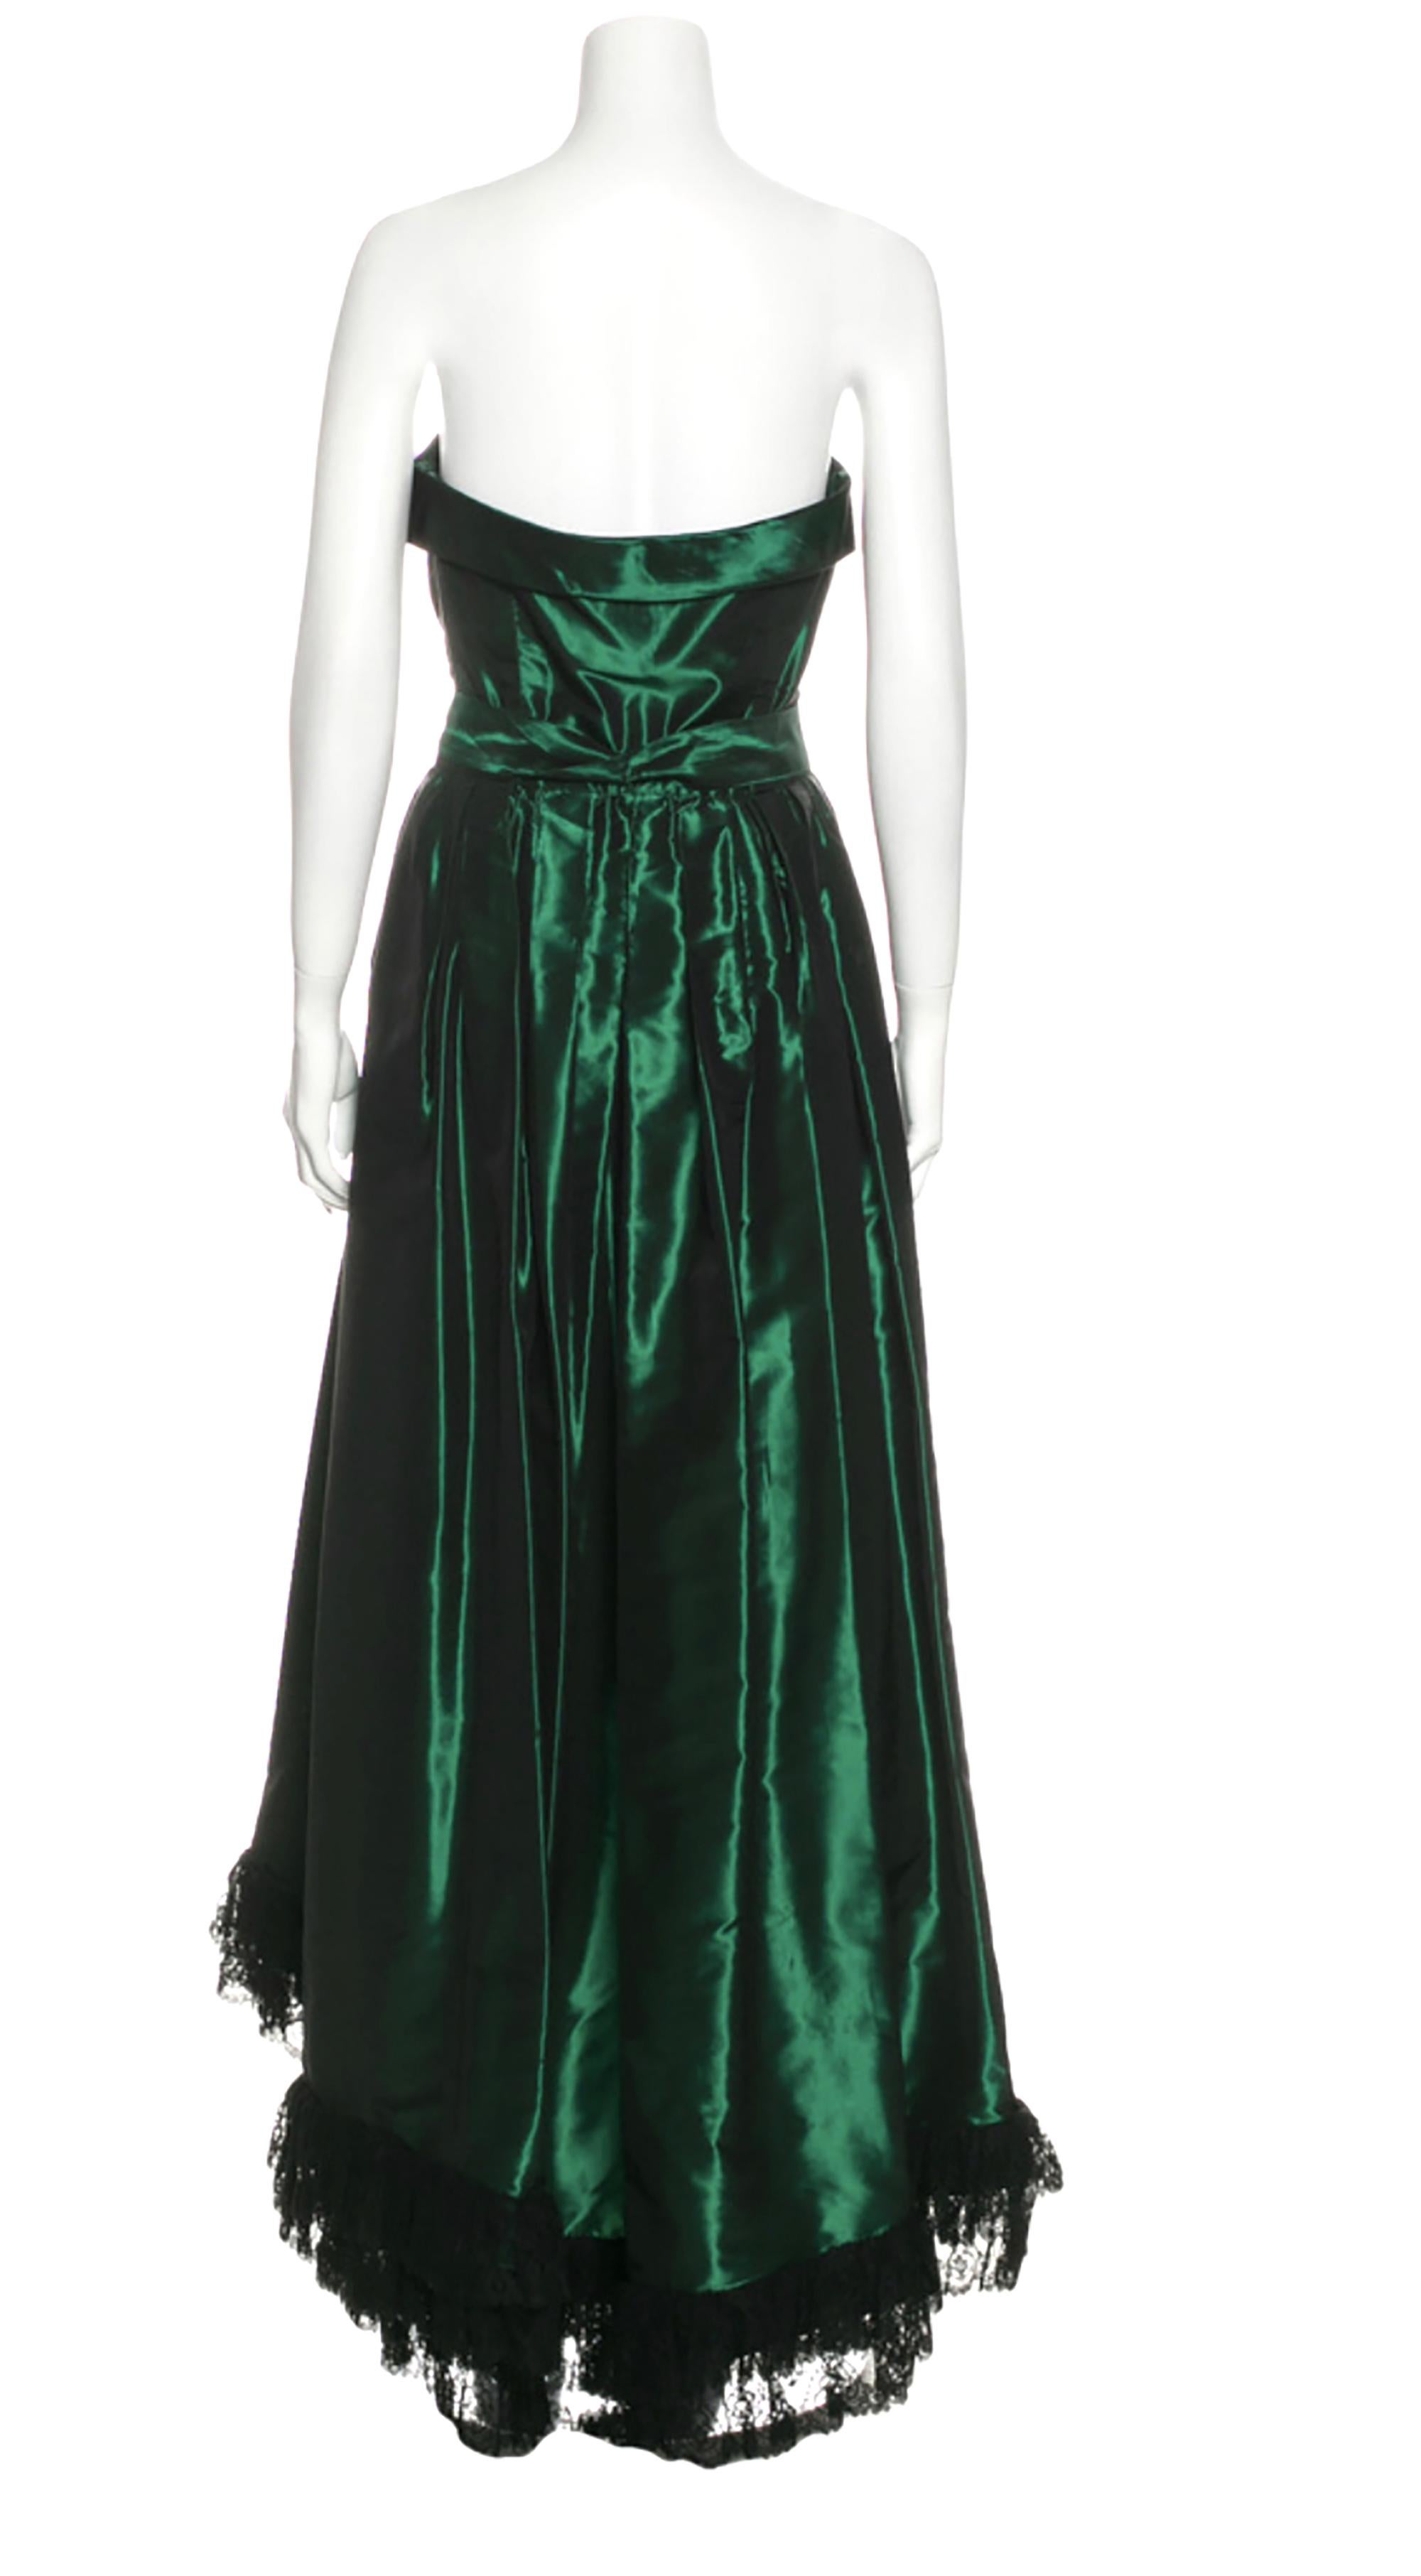 Black Yves Saint Laurent Green Taffeta Strapless Gown with Lace trim and Large Wrap